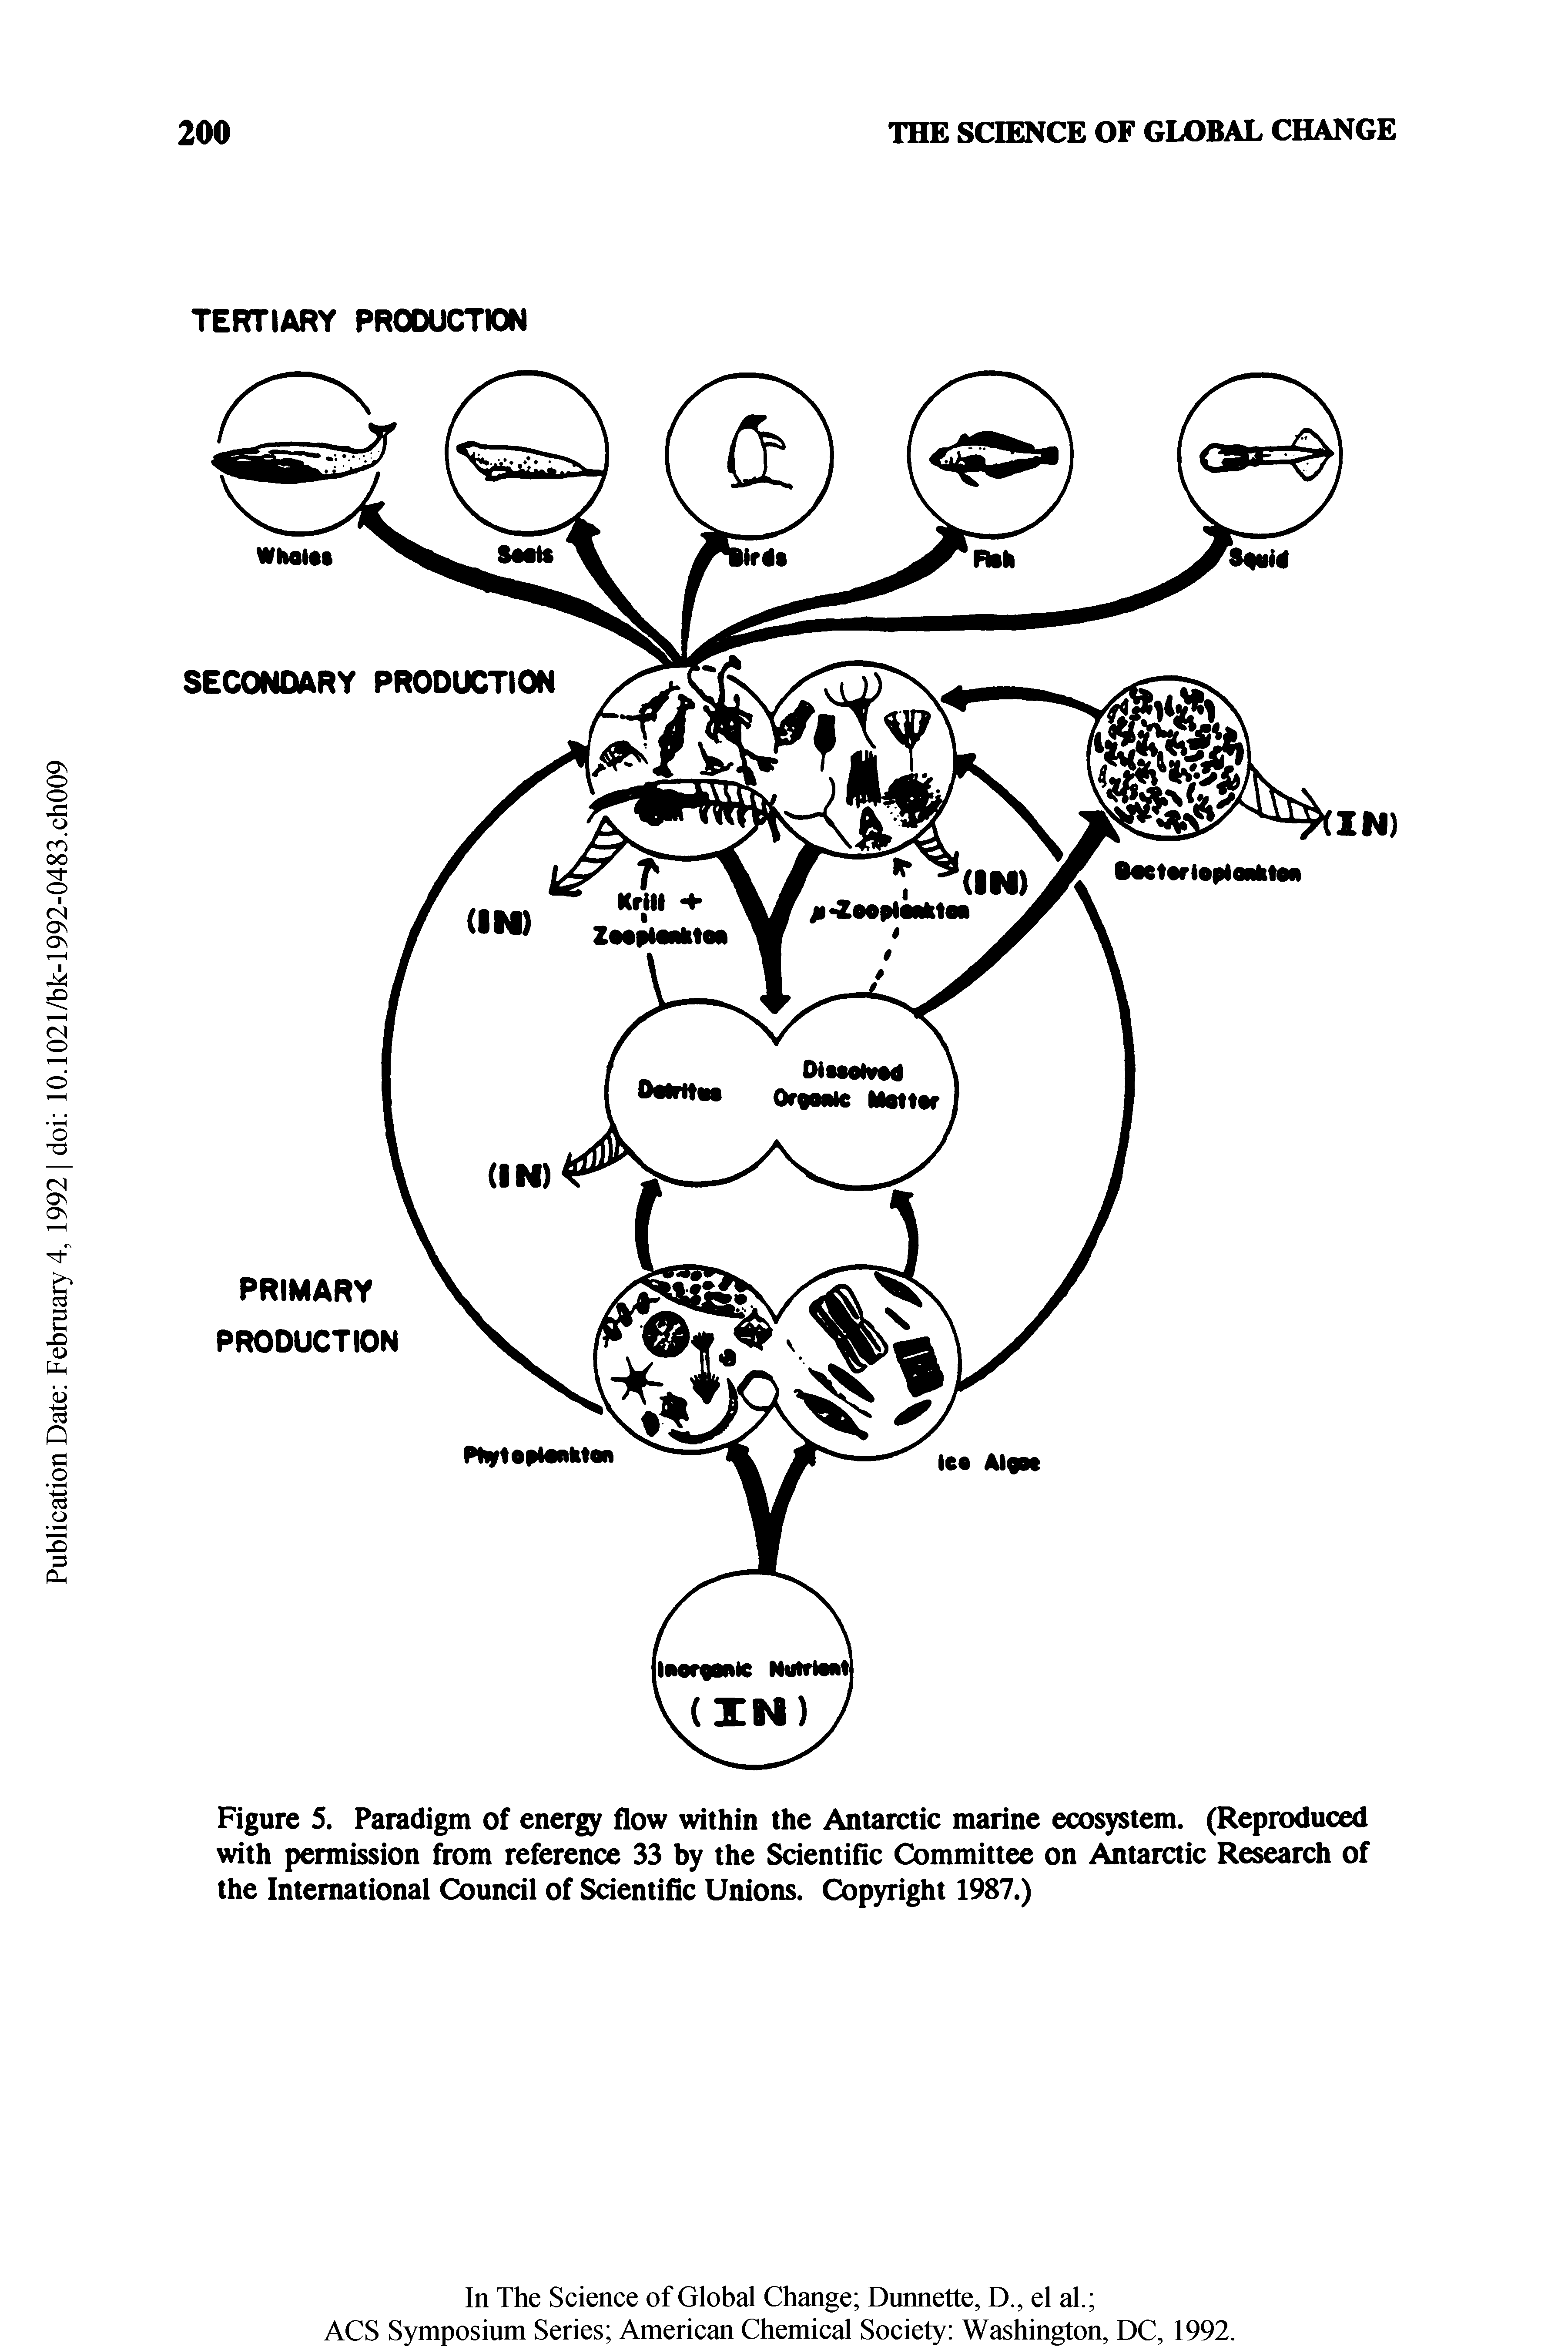 Figure 5. Paradigm of energy flow within the Antarctic marine ecosystem. (Reproduced with permission from reference 33 by the Scientific Committee on Antarctic Research of the International Council of Scientific Unions. Copyright 1987.)...